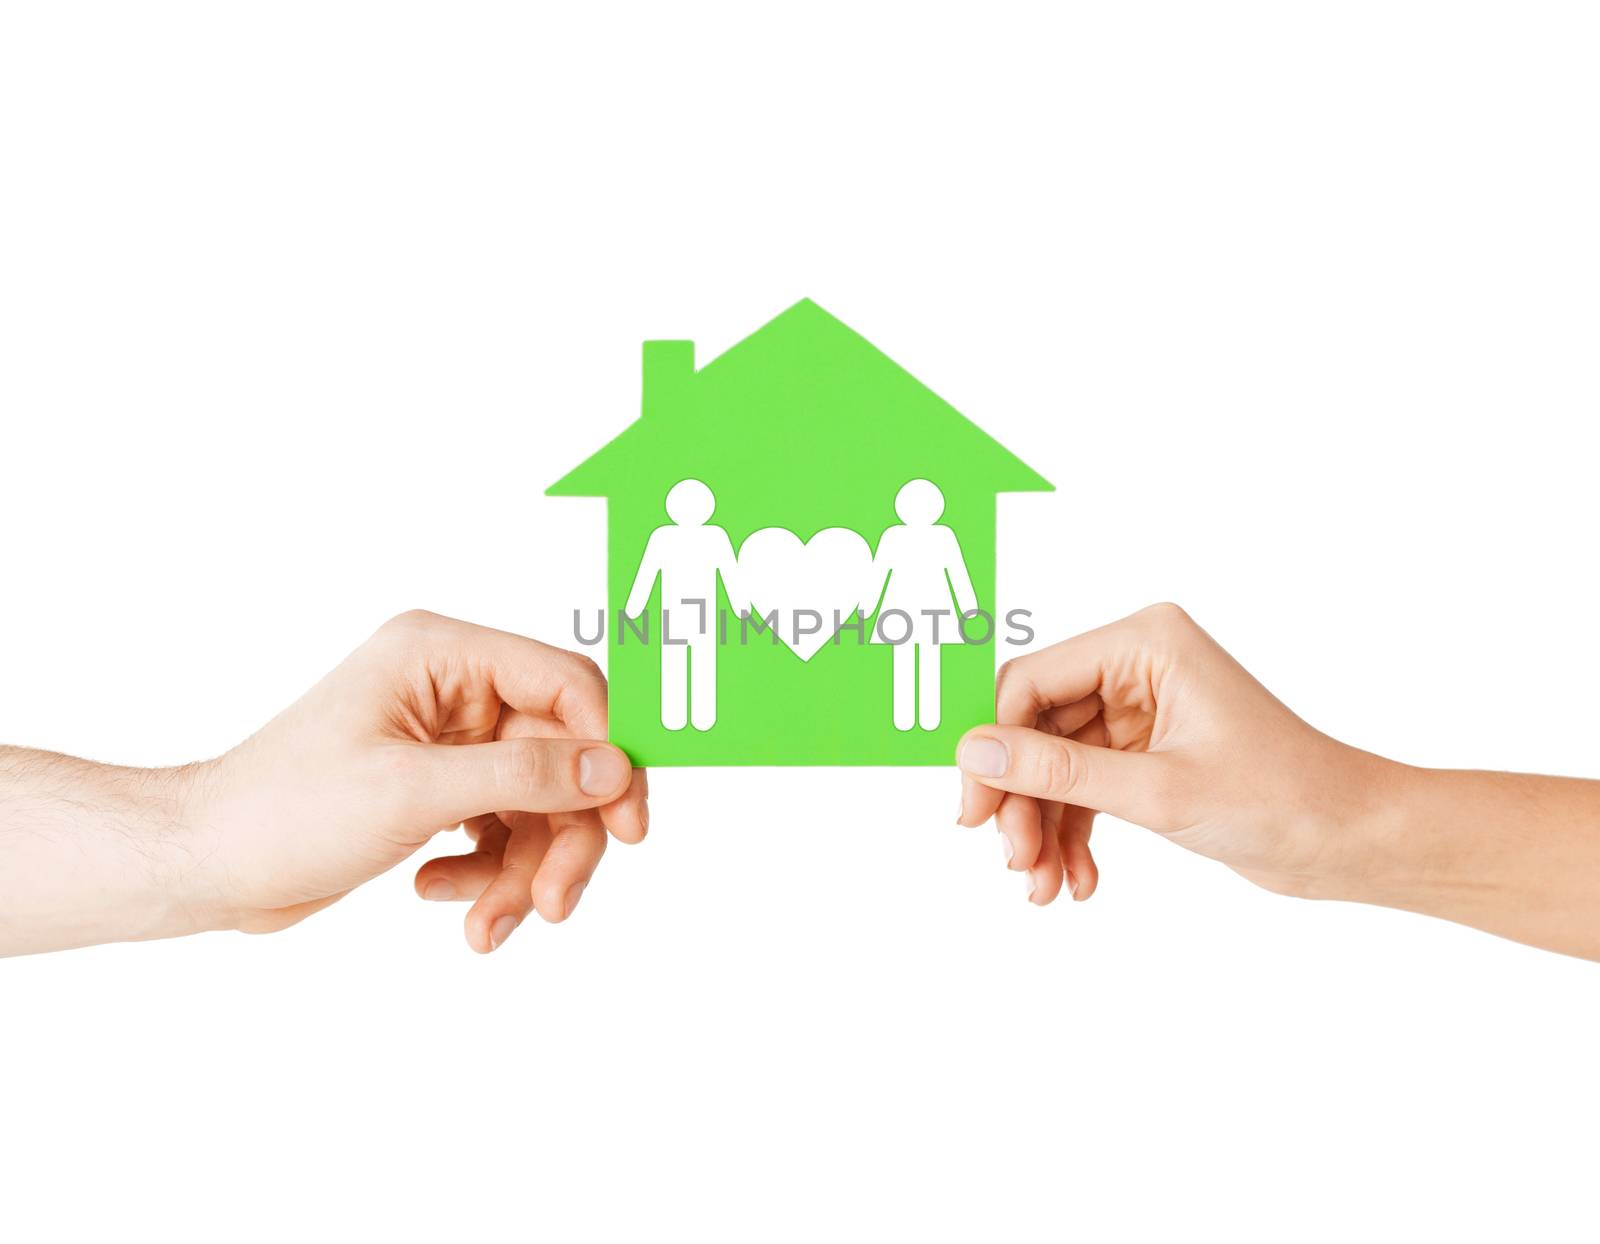 real estate and family home concept - isolated picture of male and female hands holding green paper house with family